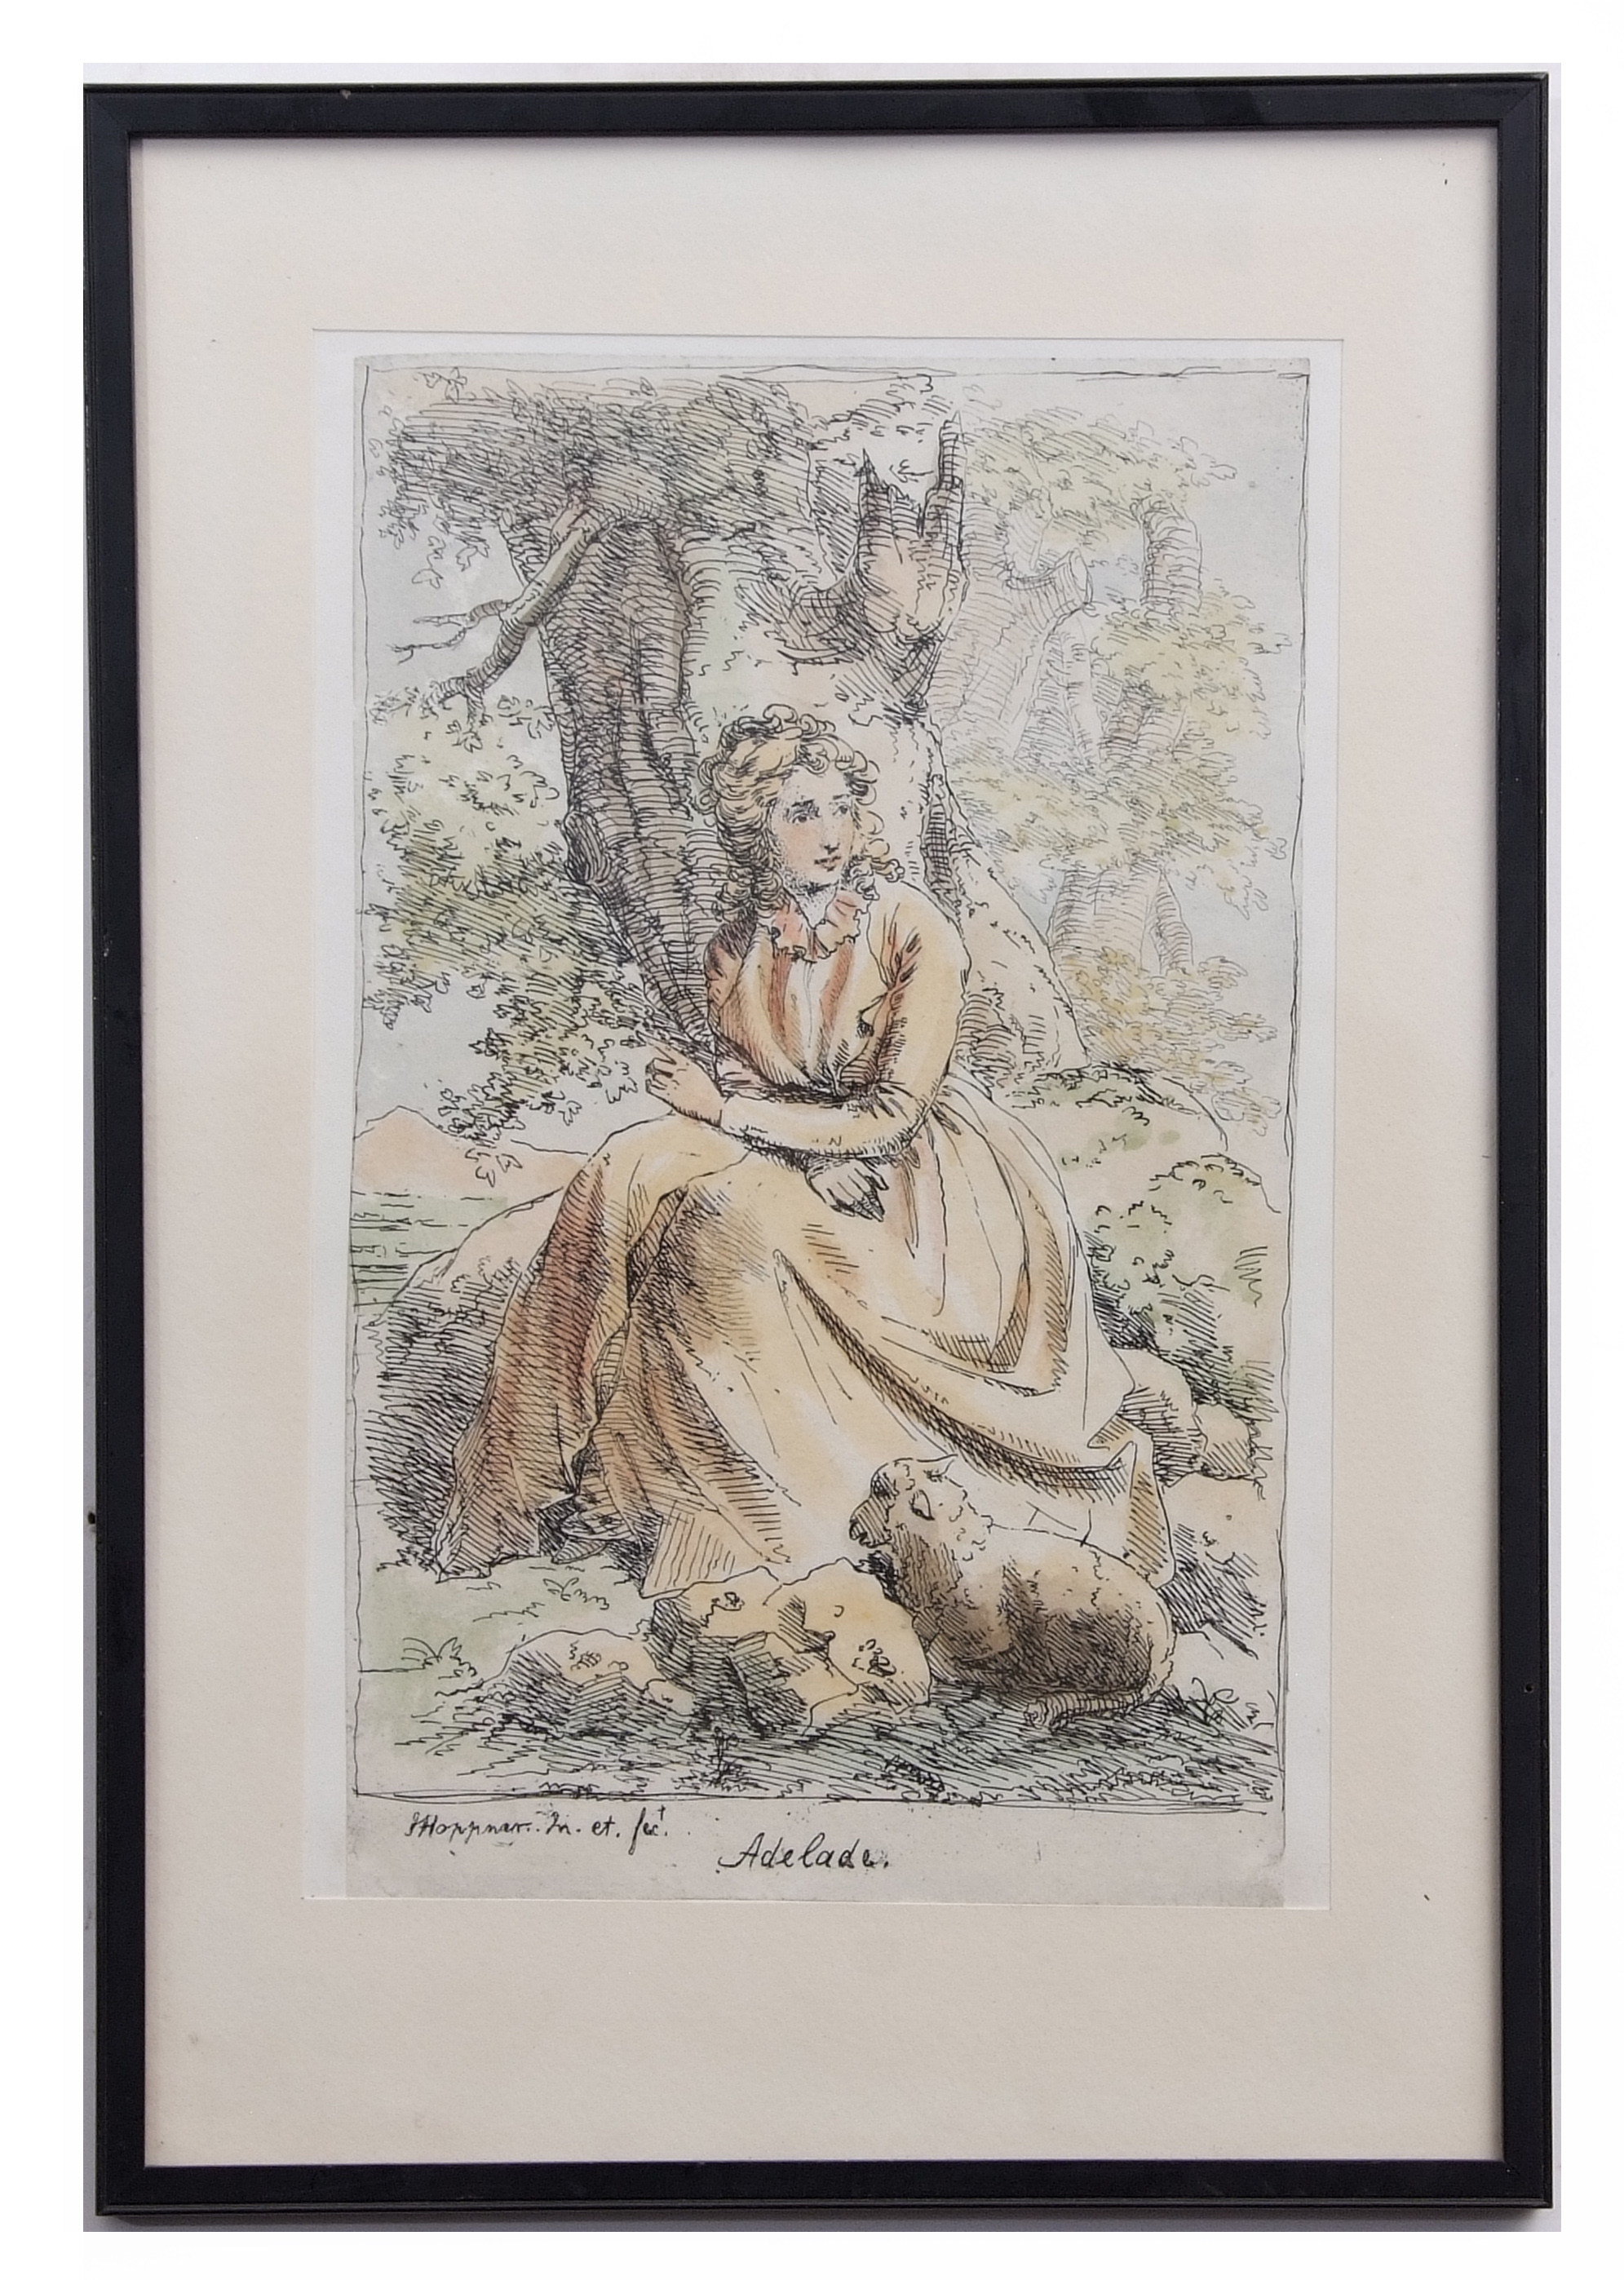 AFTER J HOPPNER, "Adelade", rare hand coloured etching, late 18th century, 27 x 18cm